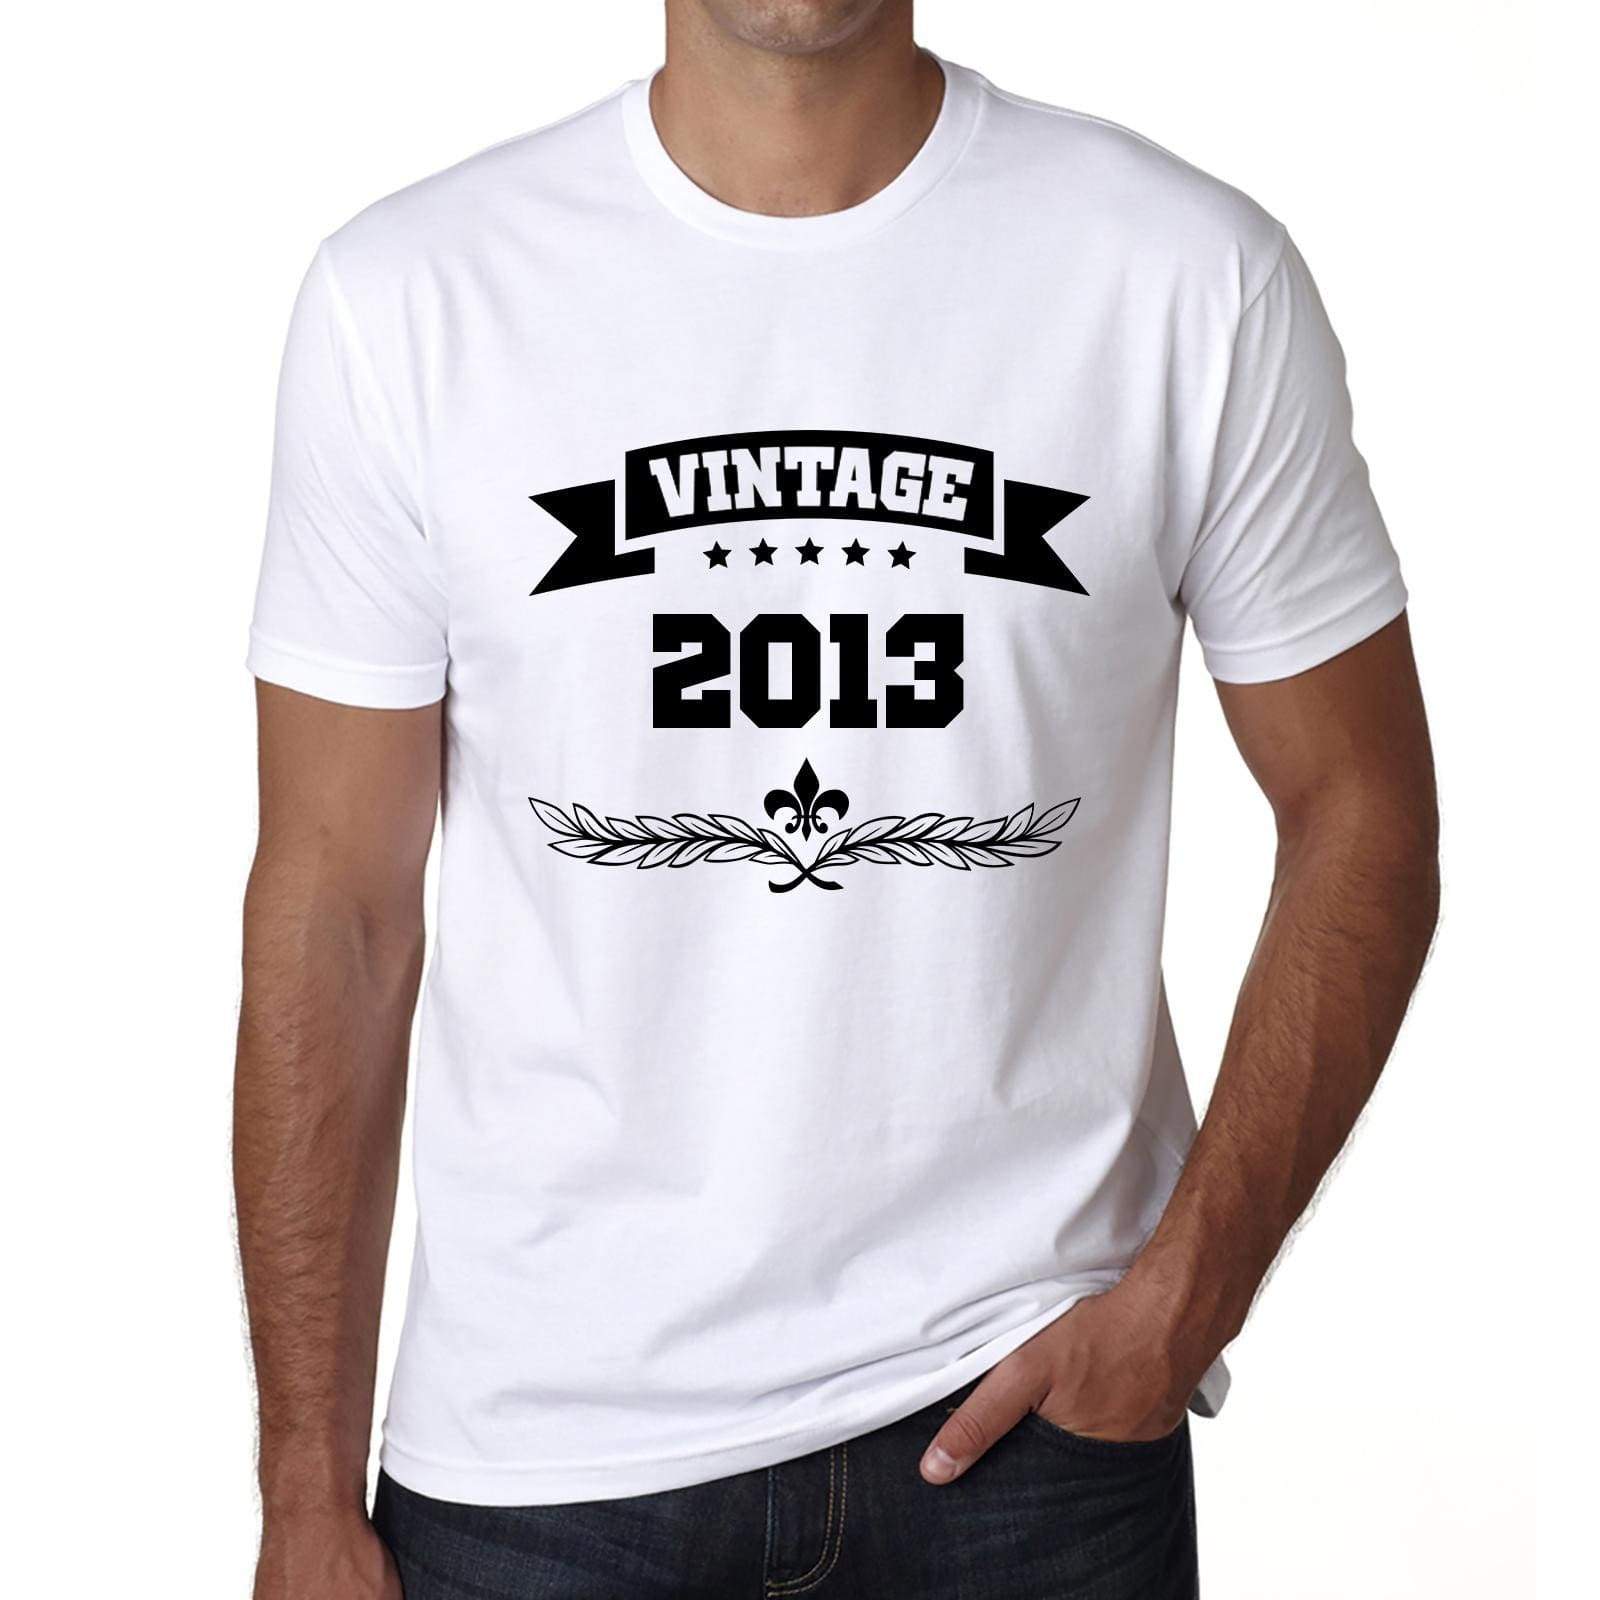 2013 Vintage Year White Mens Short Sleeve Round Neck T-Shirt 00096 - White / S - Casual